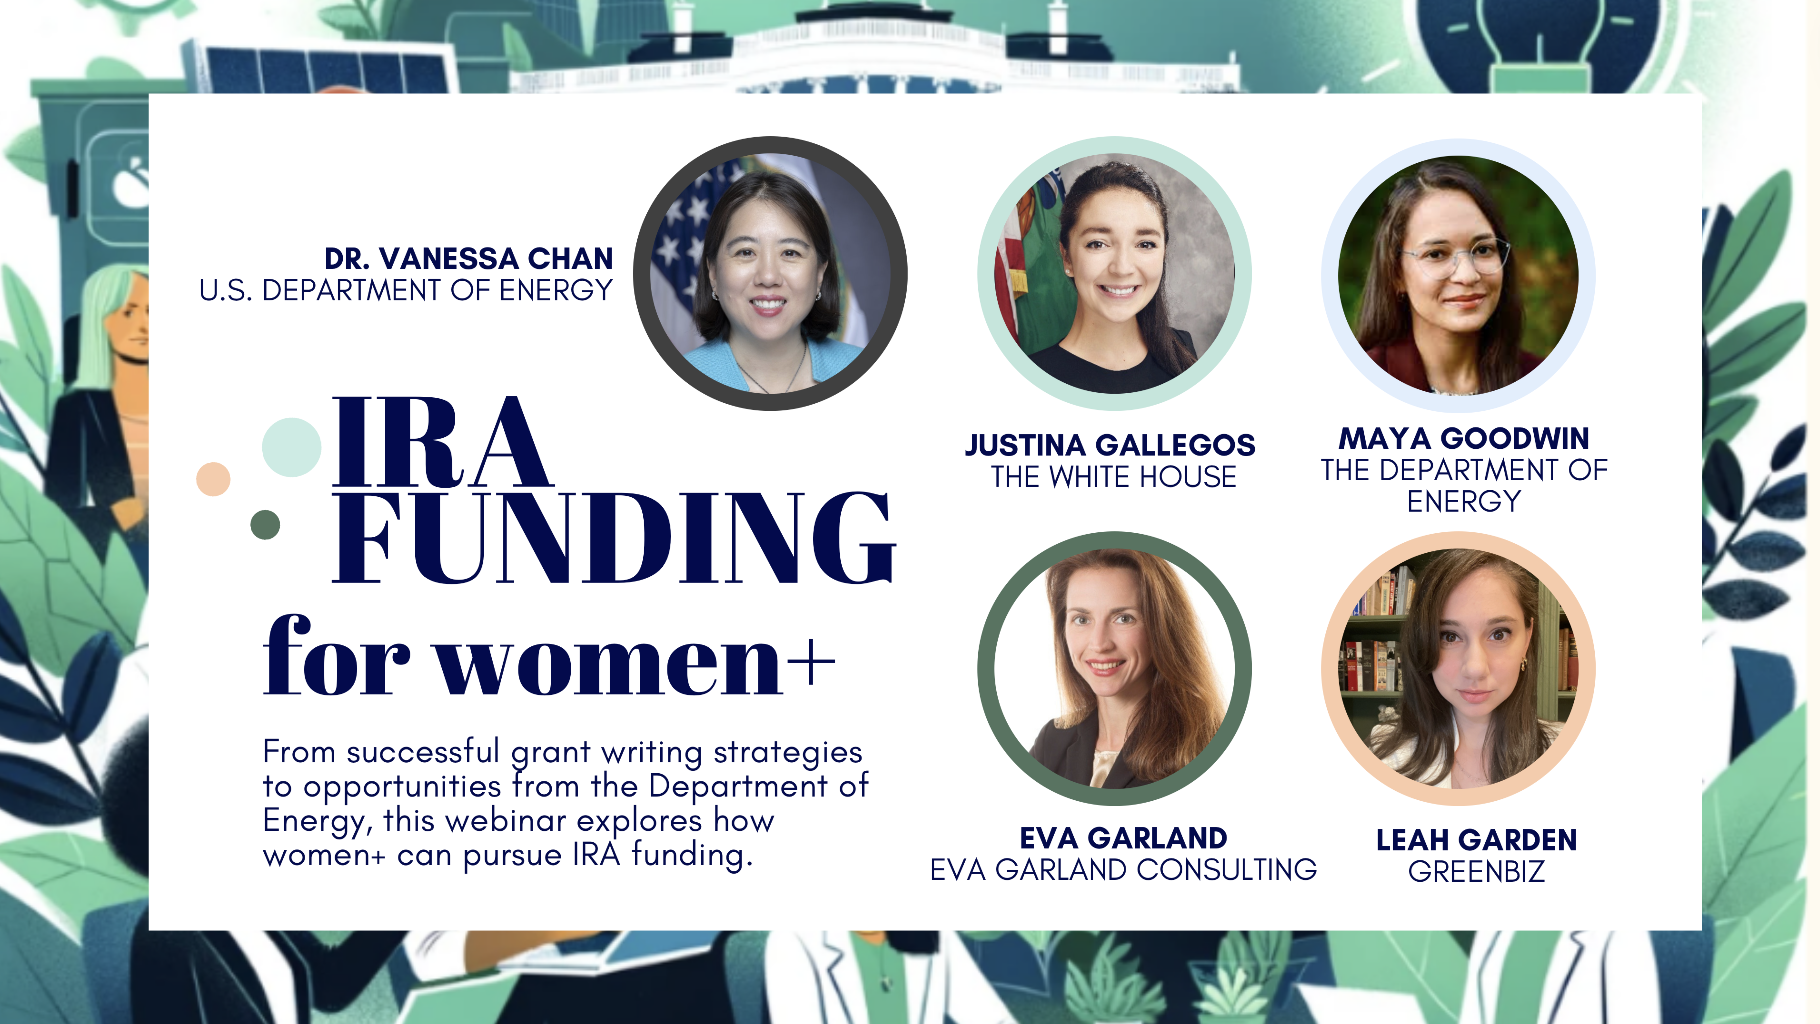 IRA Funding for Women+: Resources and More